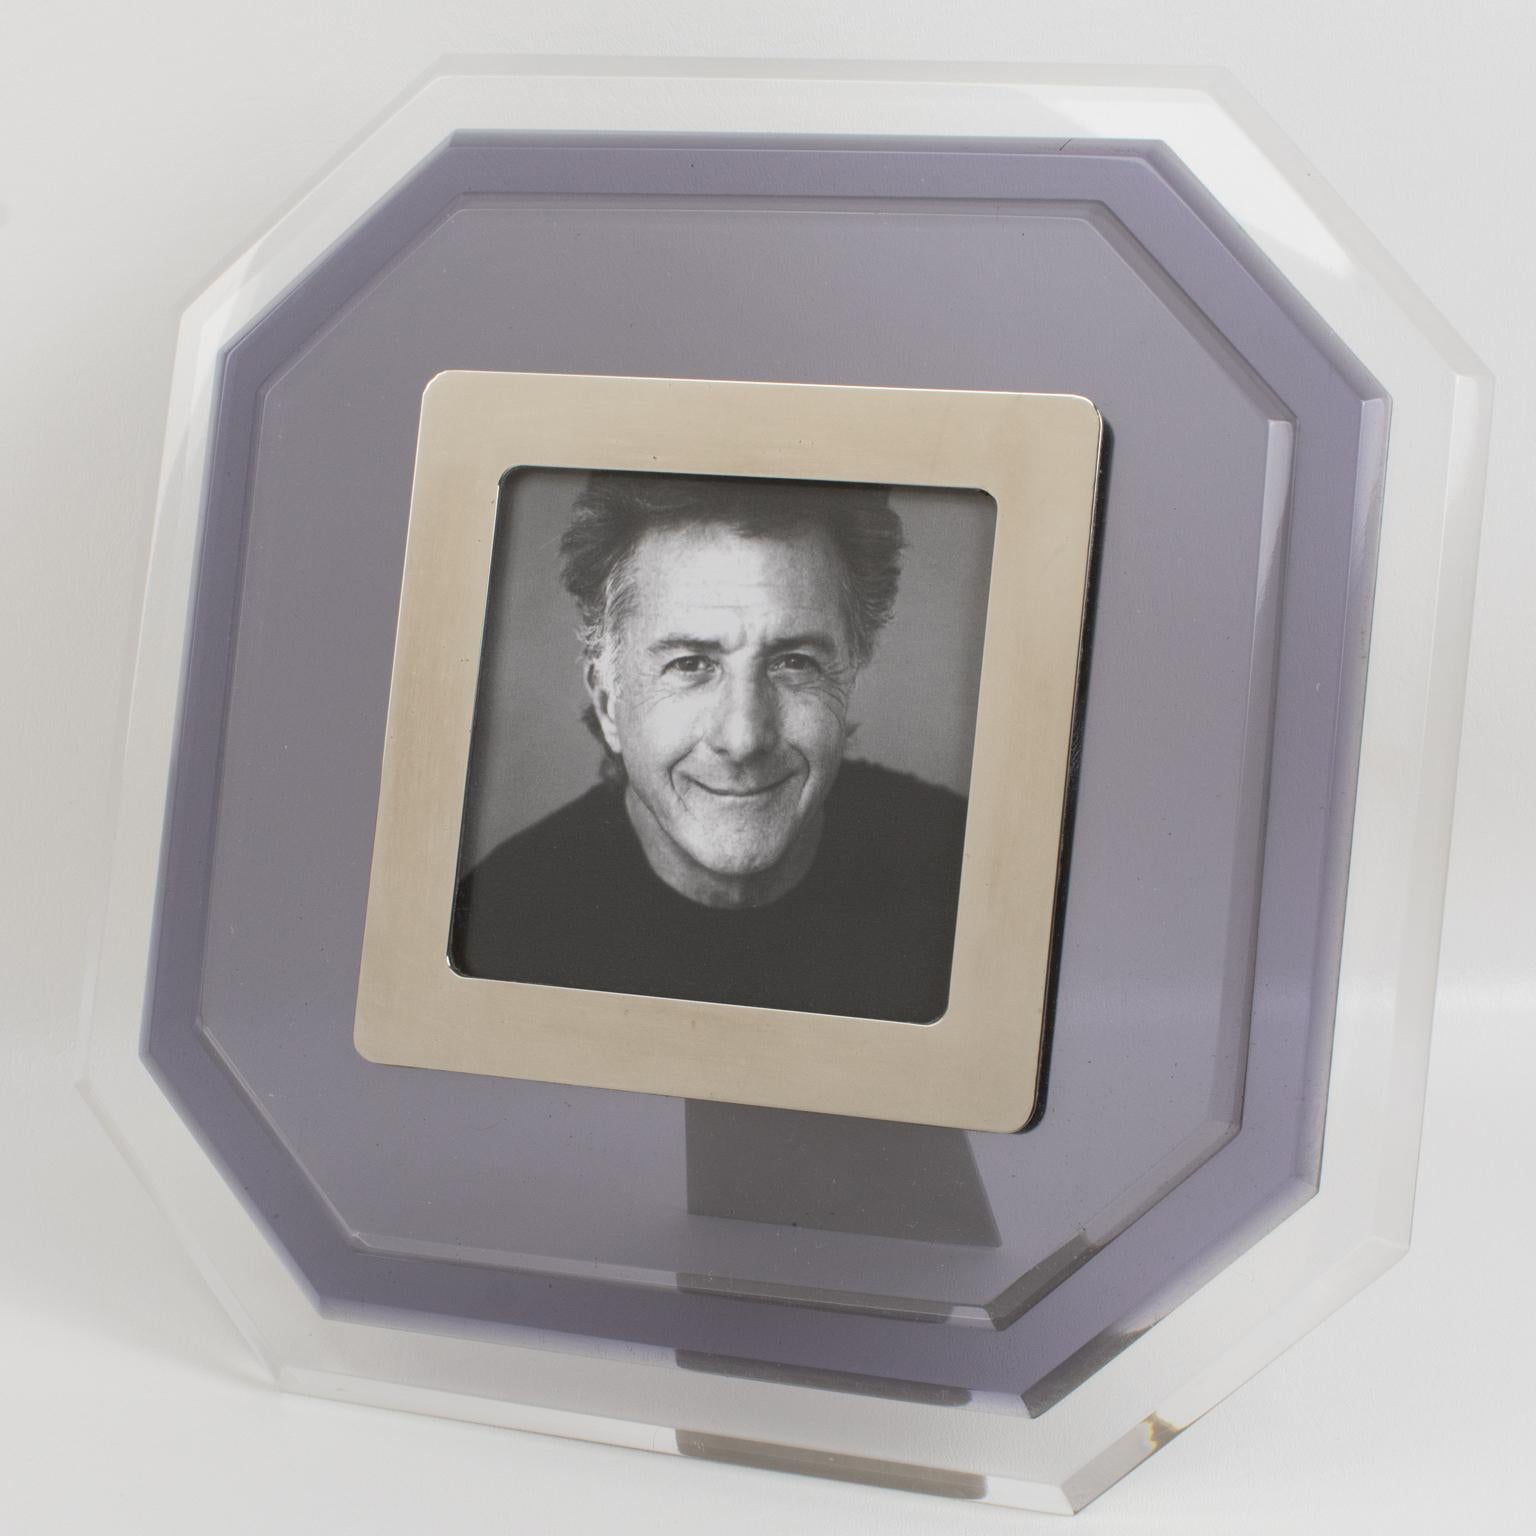 This beautiful and substantial modern Lucite picture photo frame was crafted in Italy in the 1980s. It features an octagonal shape with multilayer Lucite construction and a transparent color contrasted with a smoke blue-gray tone. The image is